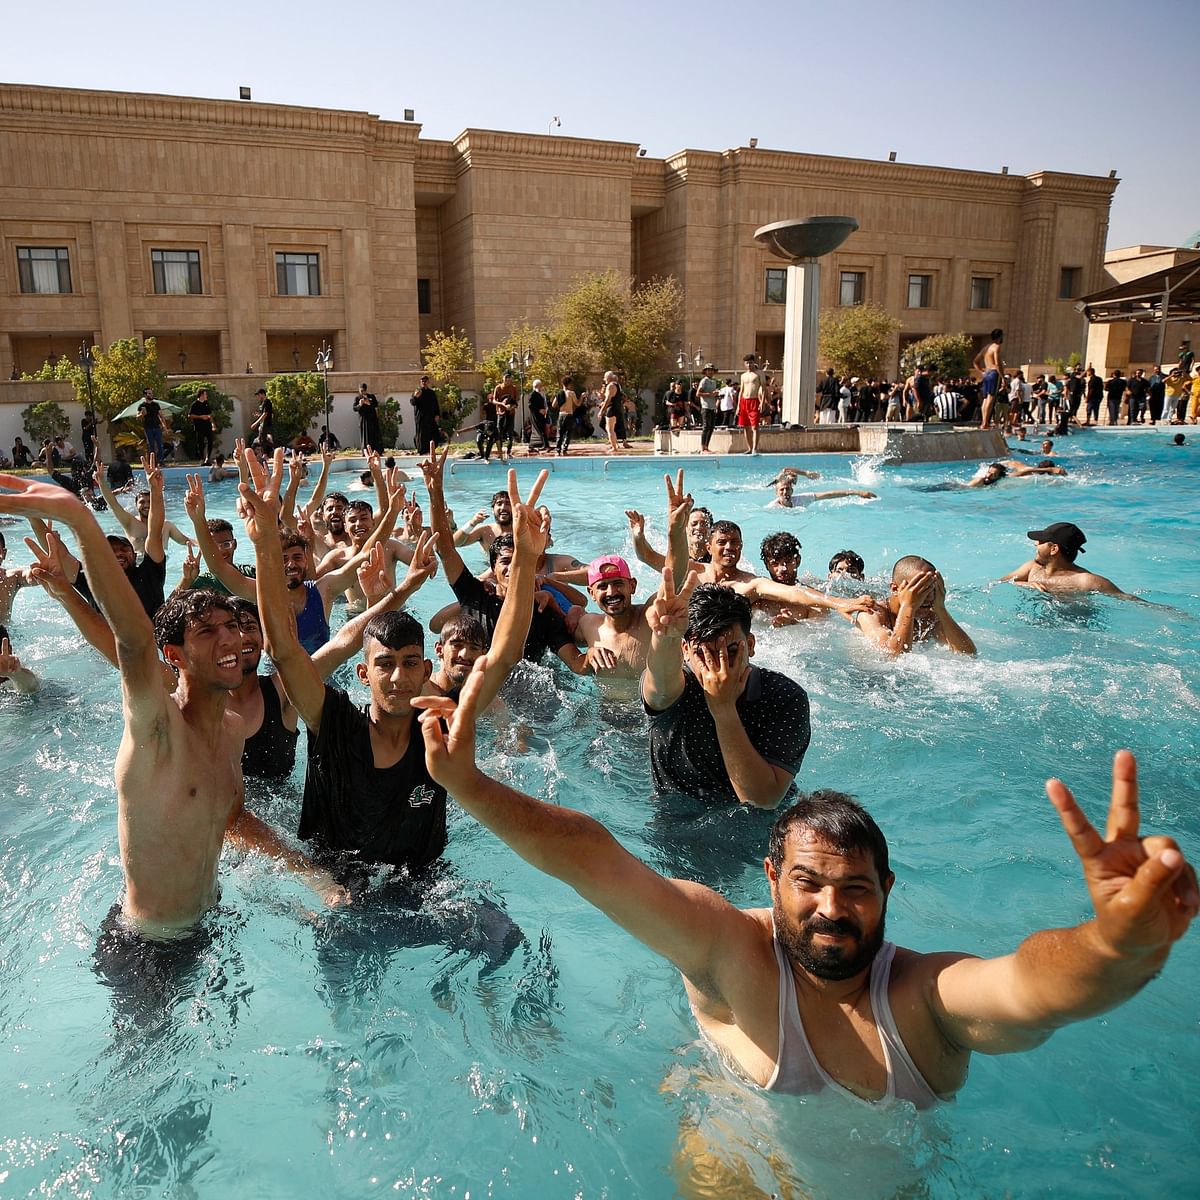 Akin to the Sri Lanka crisis, protesters in Baghdad stormed the Republican Palace.